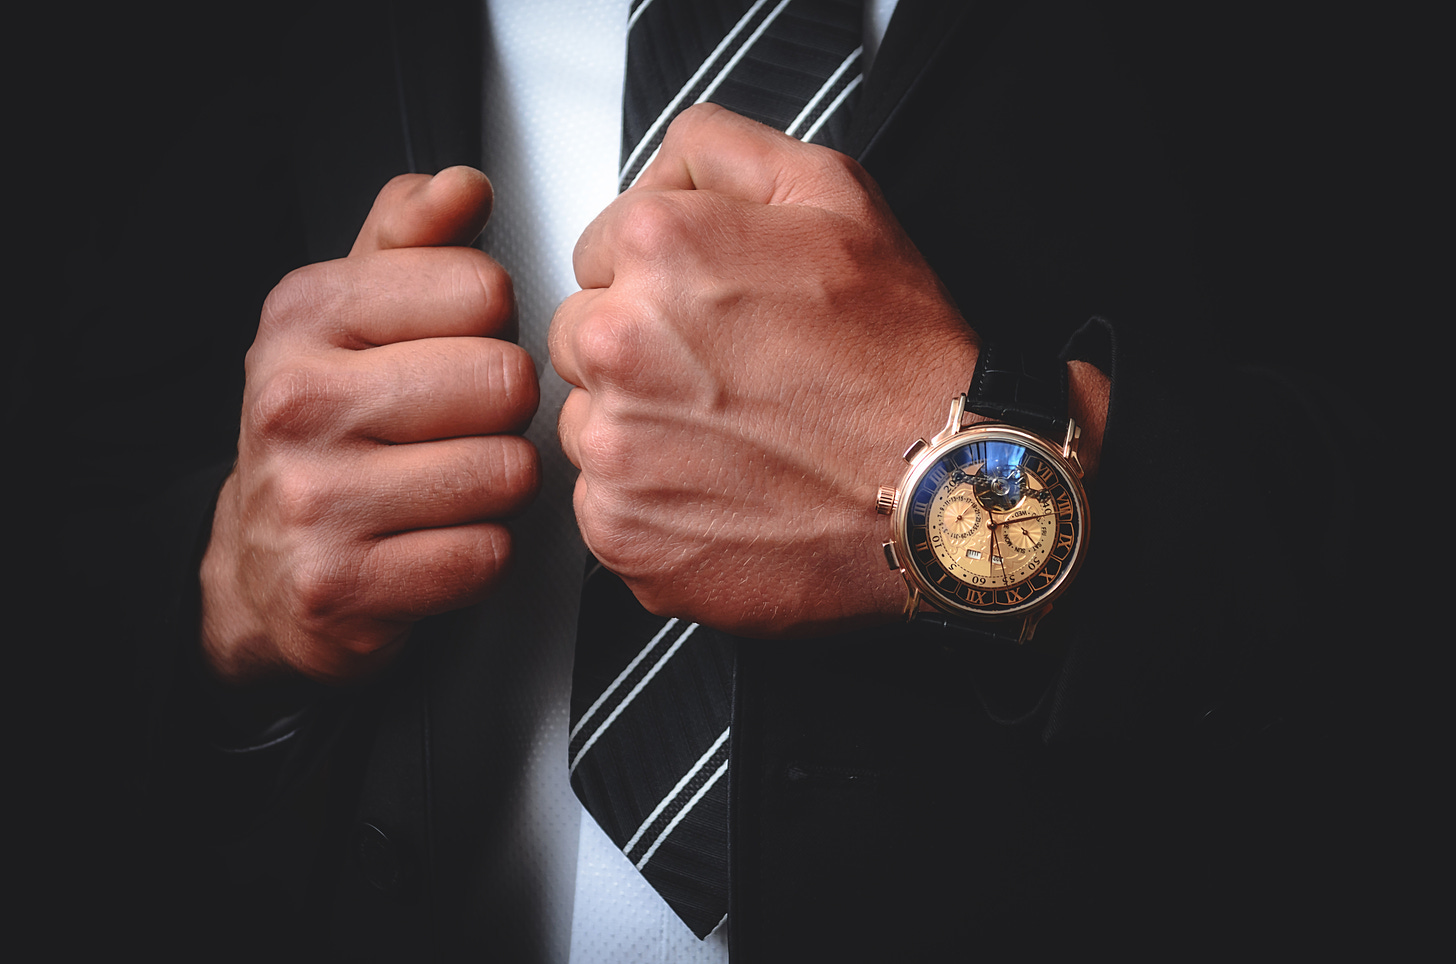 Man in suit with diagonal striped tie and elaborate watch that looks like it has  multiple time zones. I'm not sure. I'm not the watchmaker to the King.